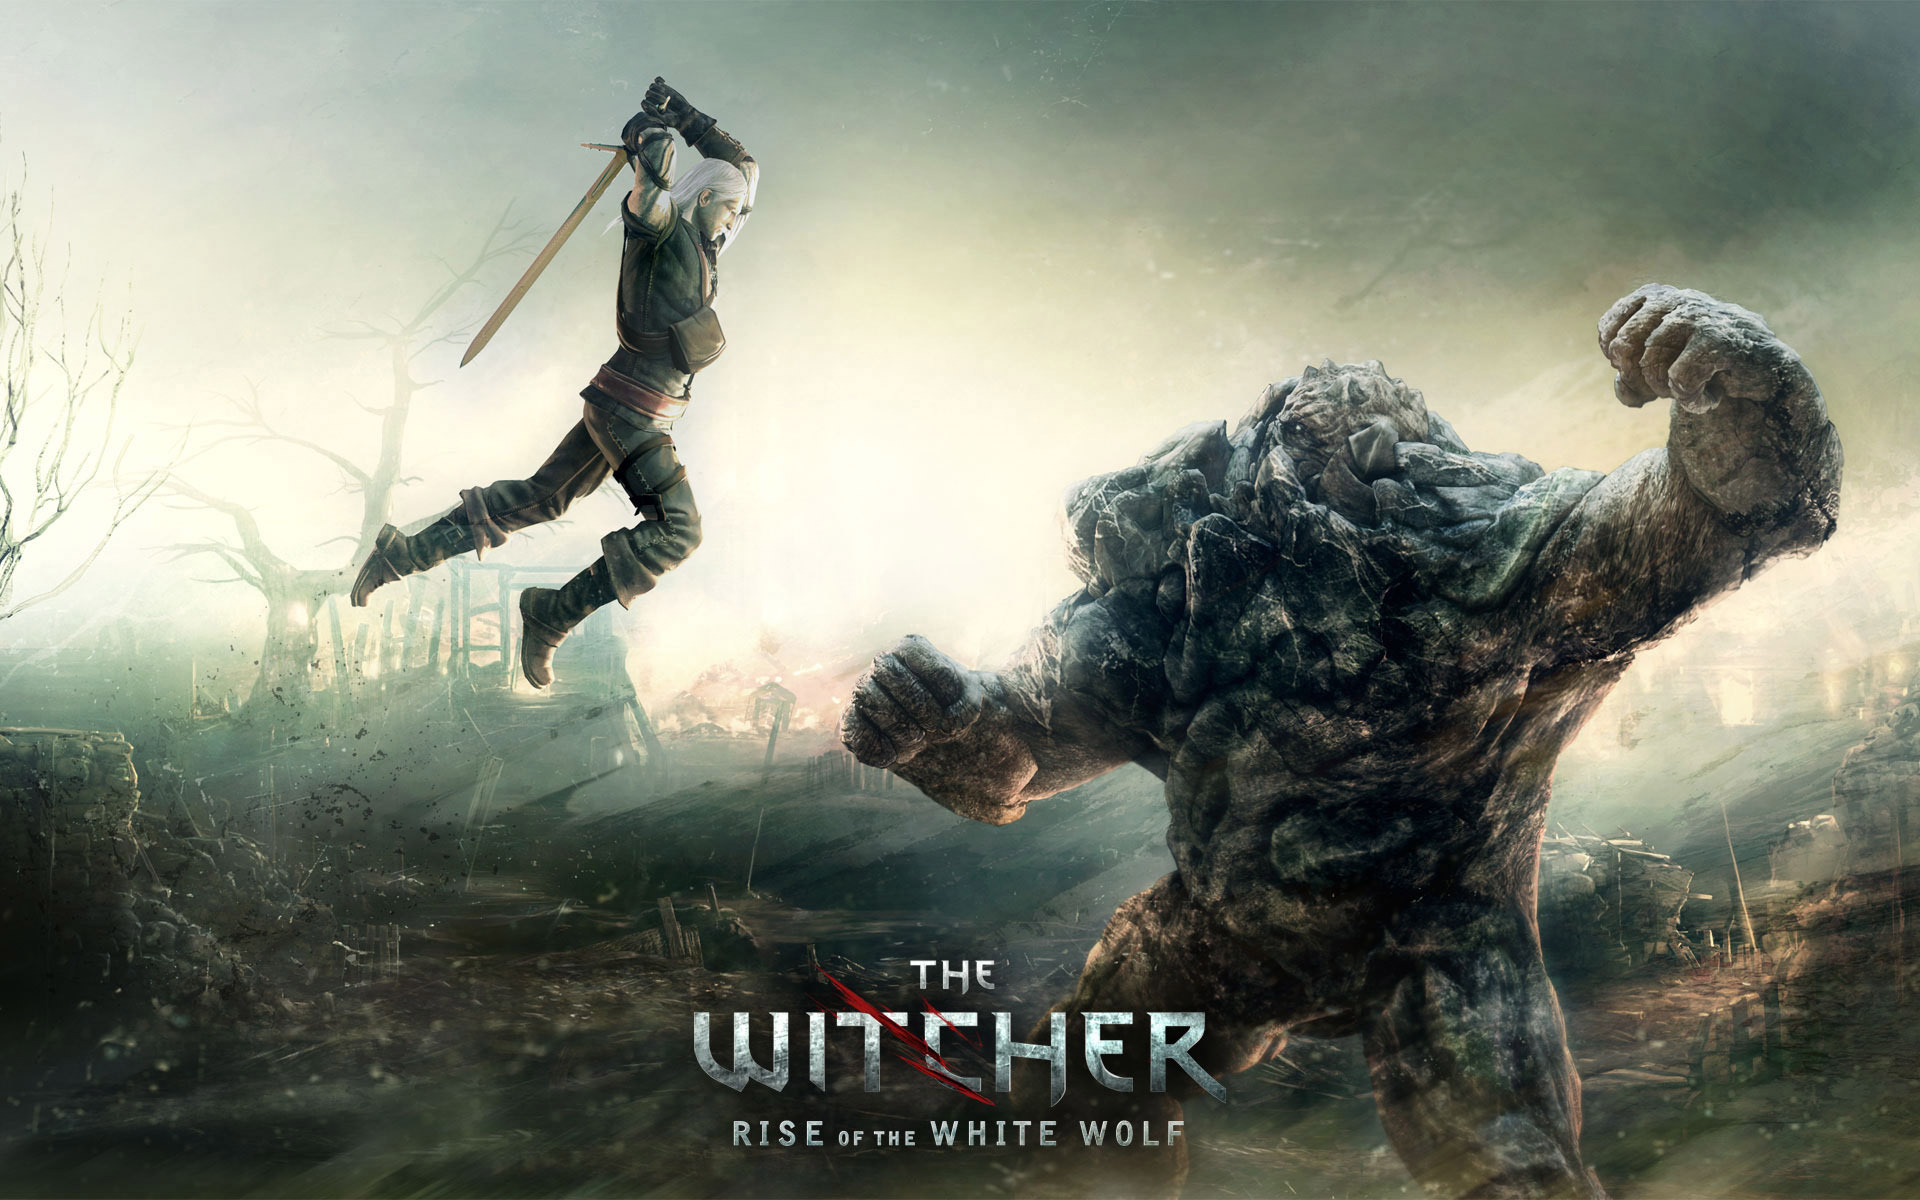 The Witcher Res: 1920x1200 / Size:436kb. Views: 8527